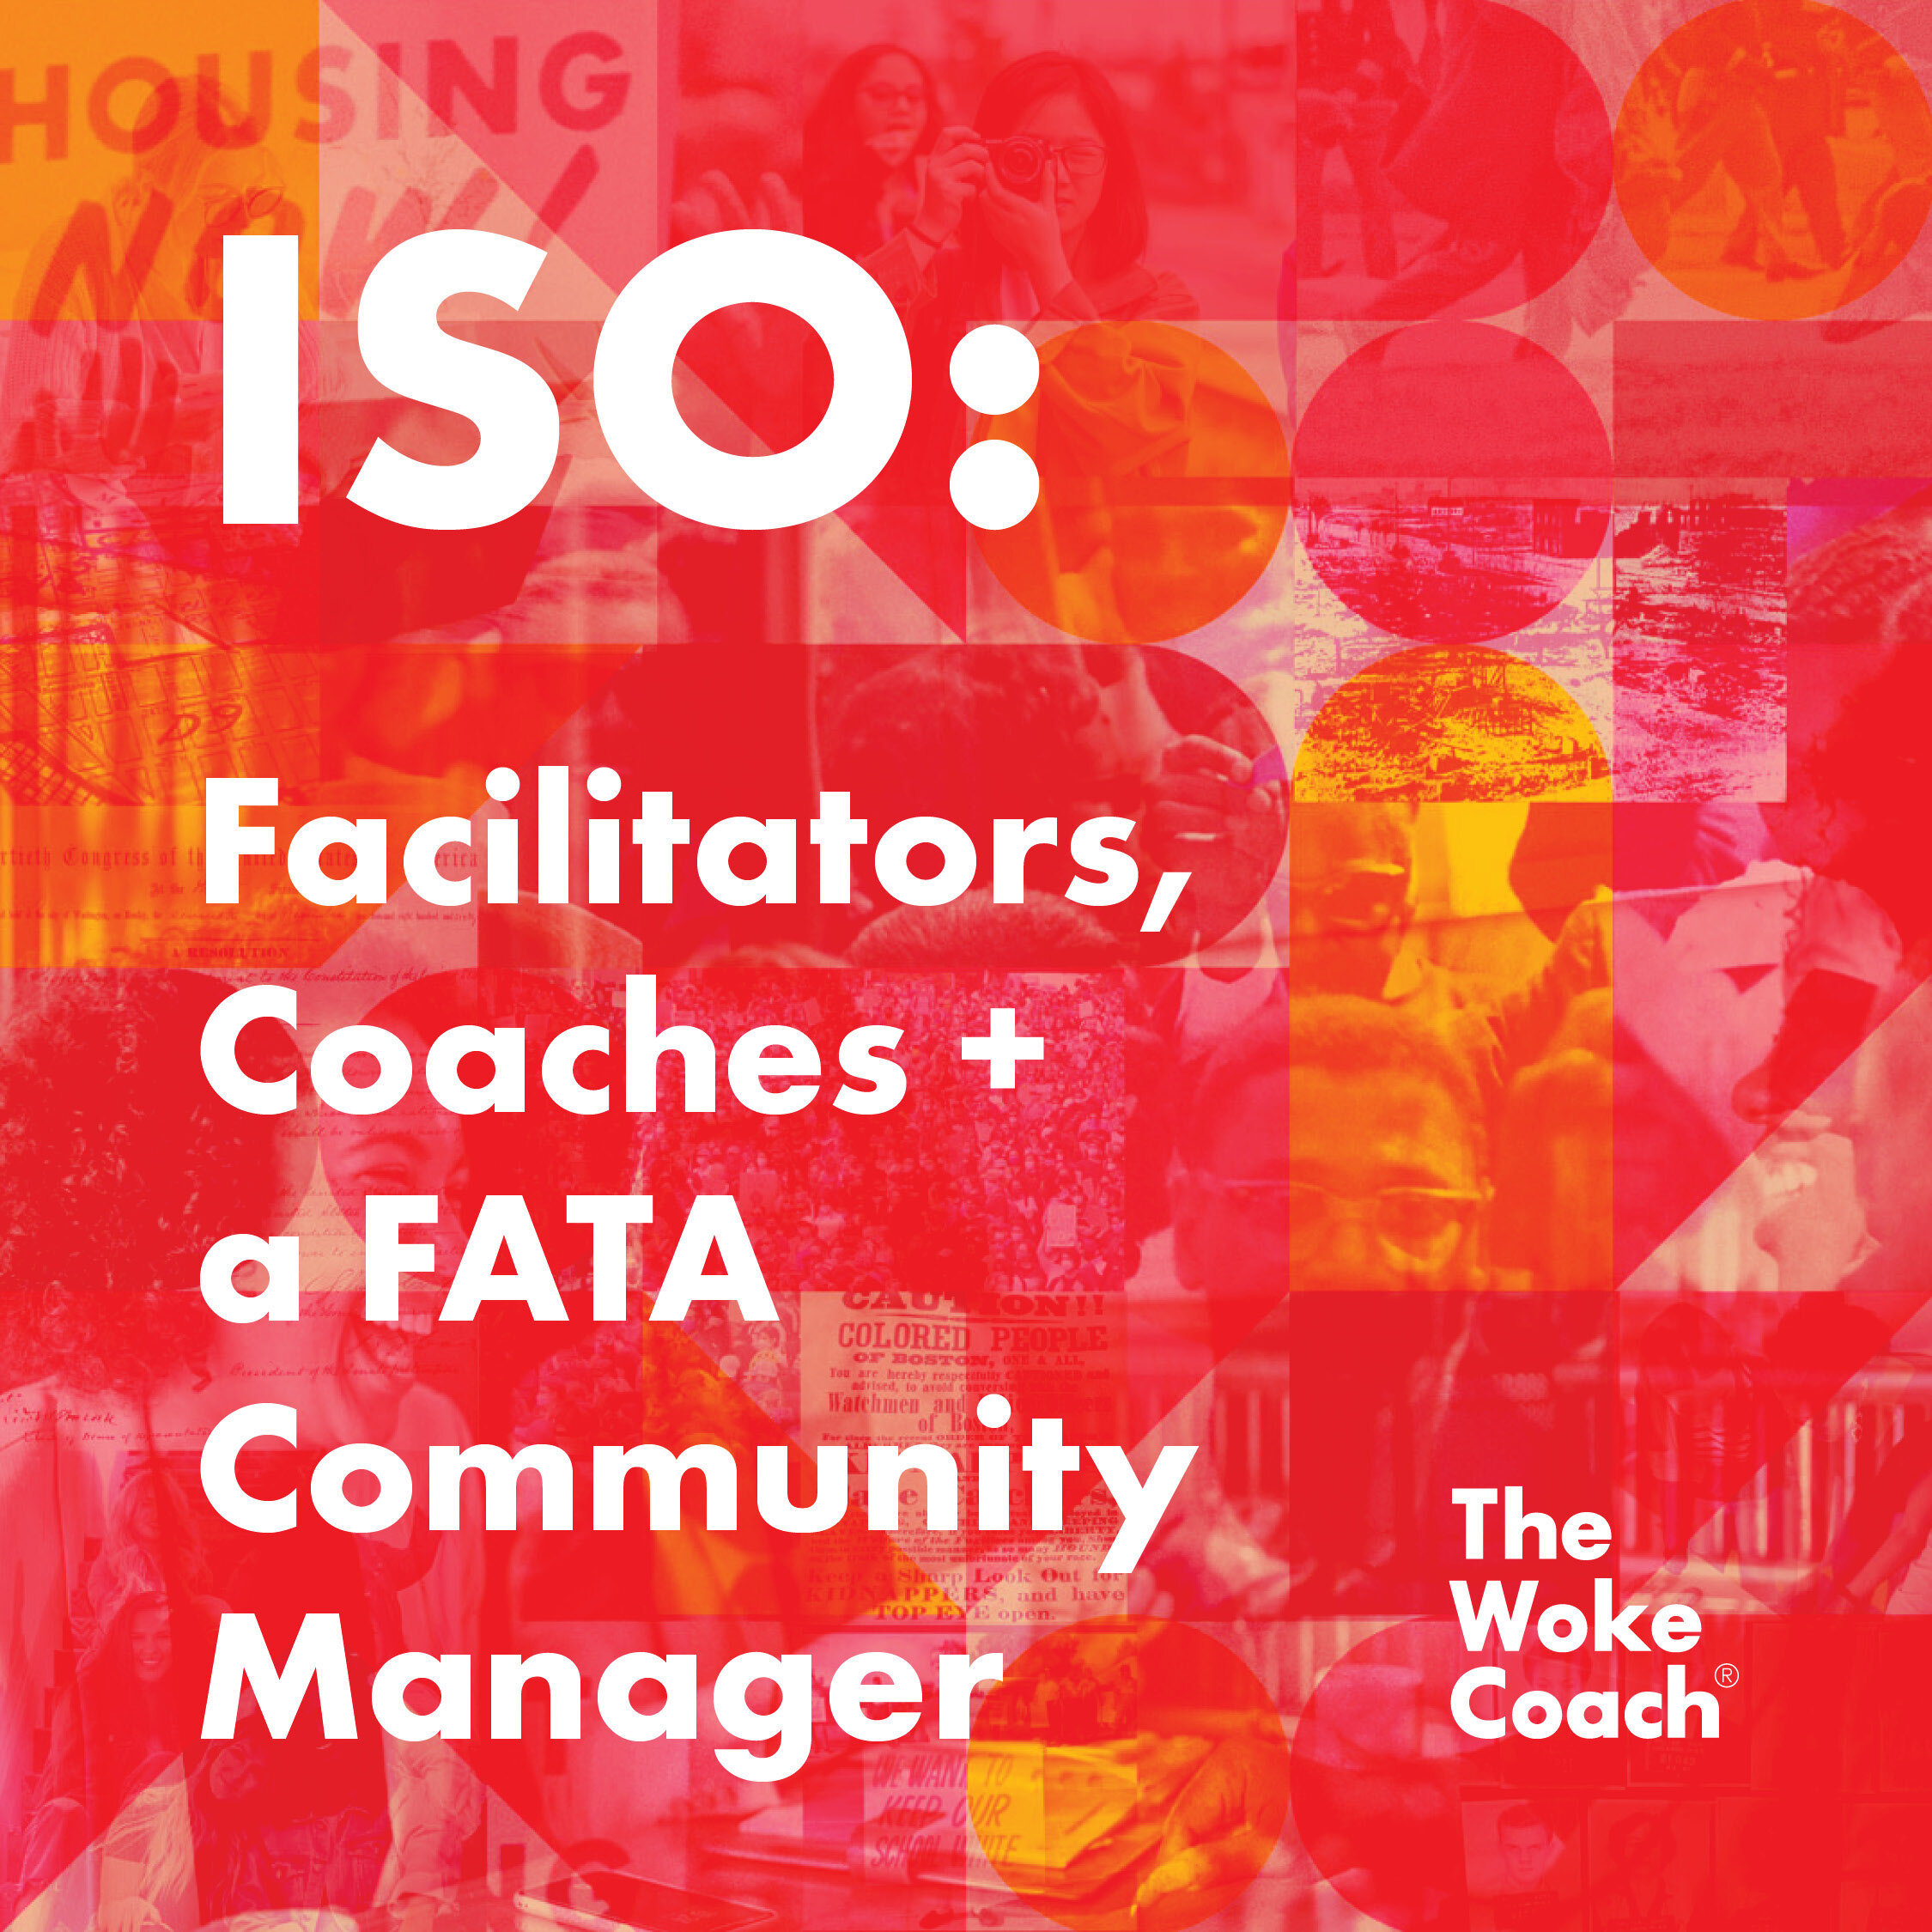 In search of: Facilitators, Coaches + a Community Manager